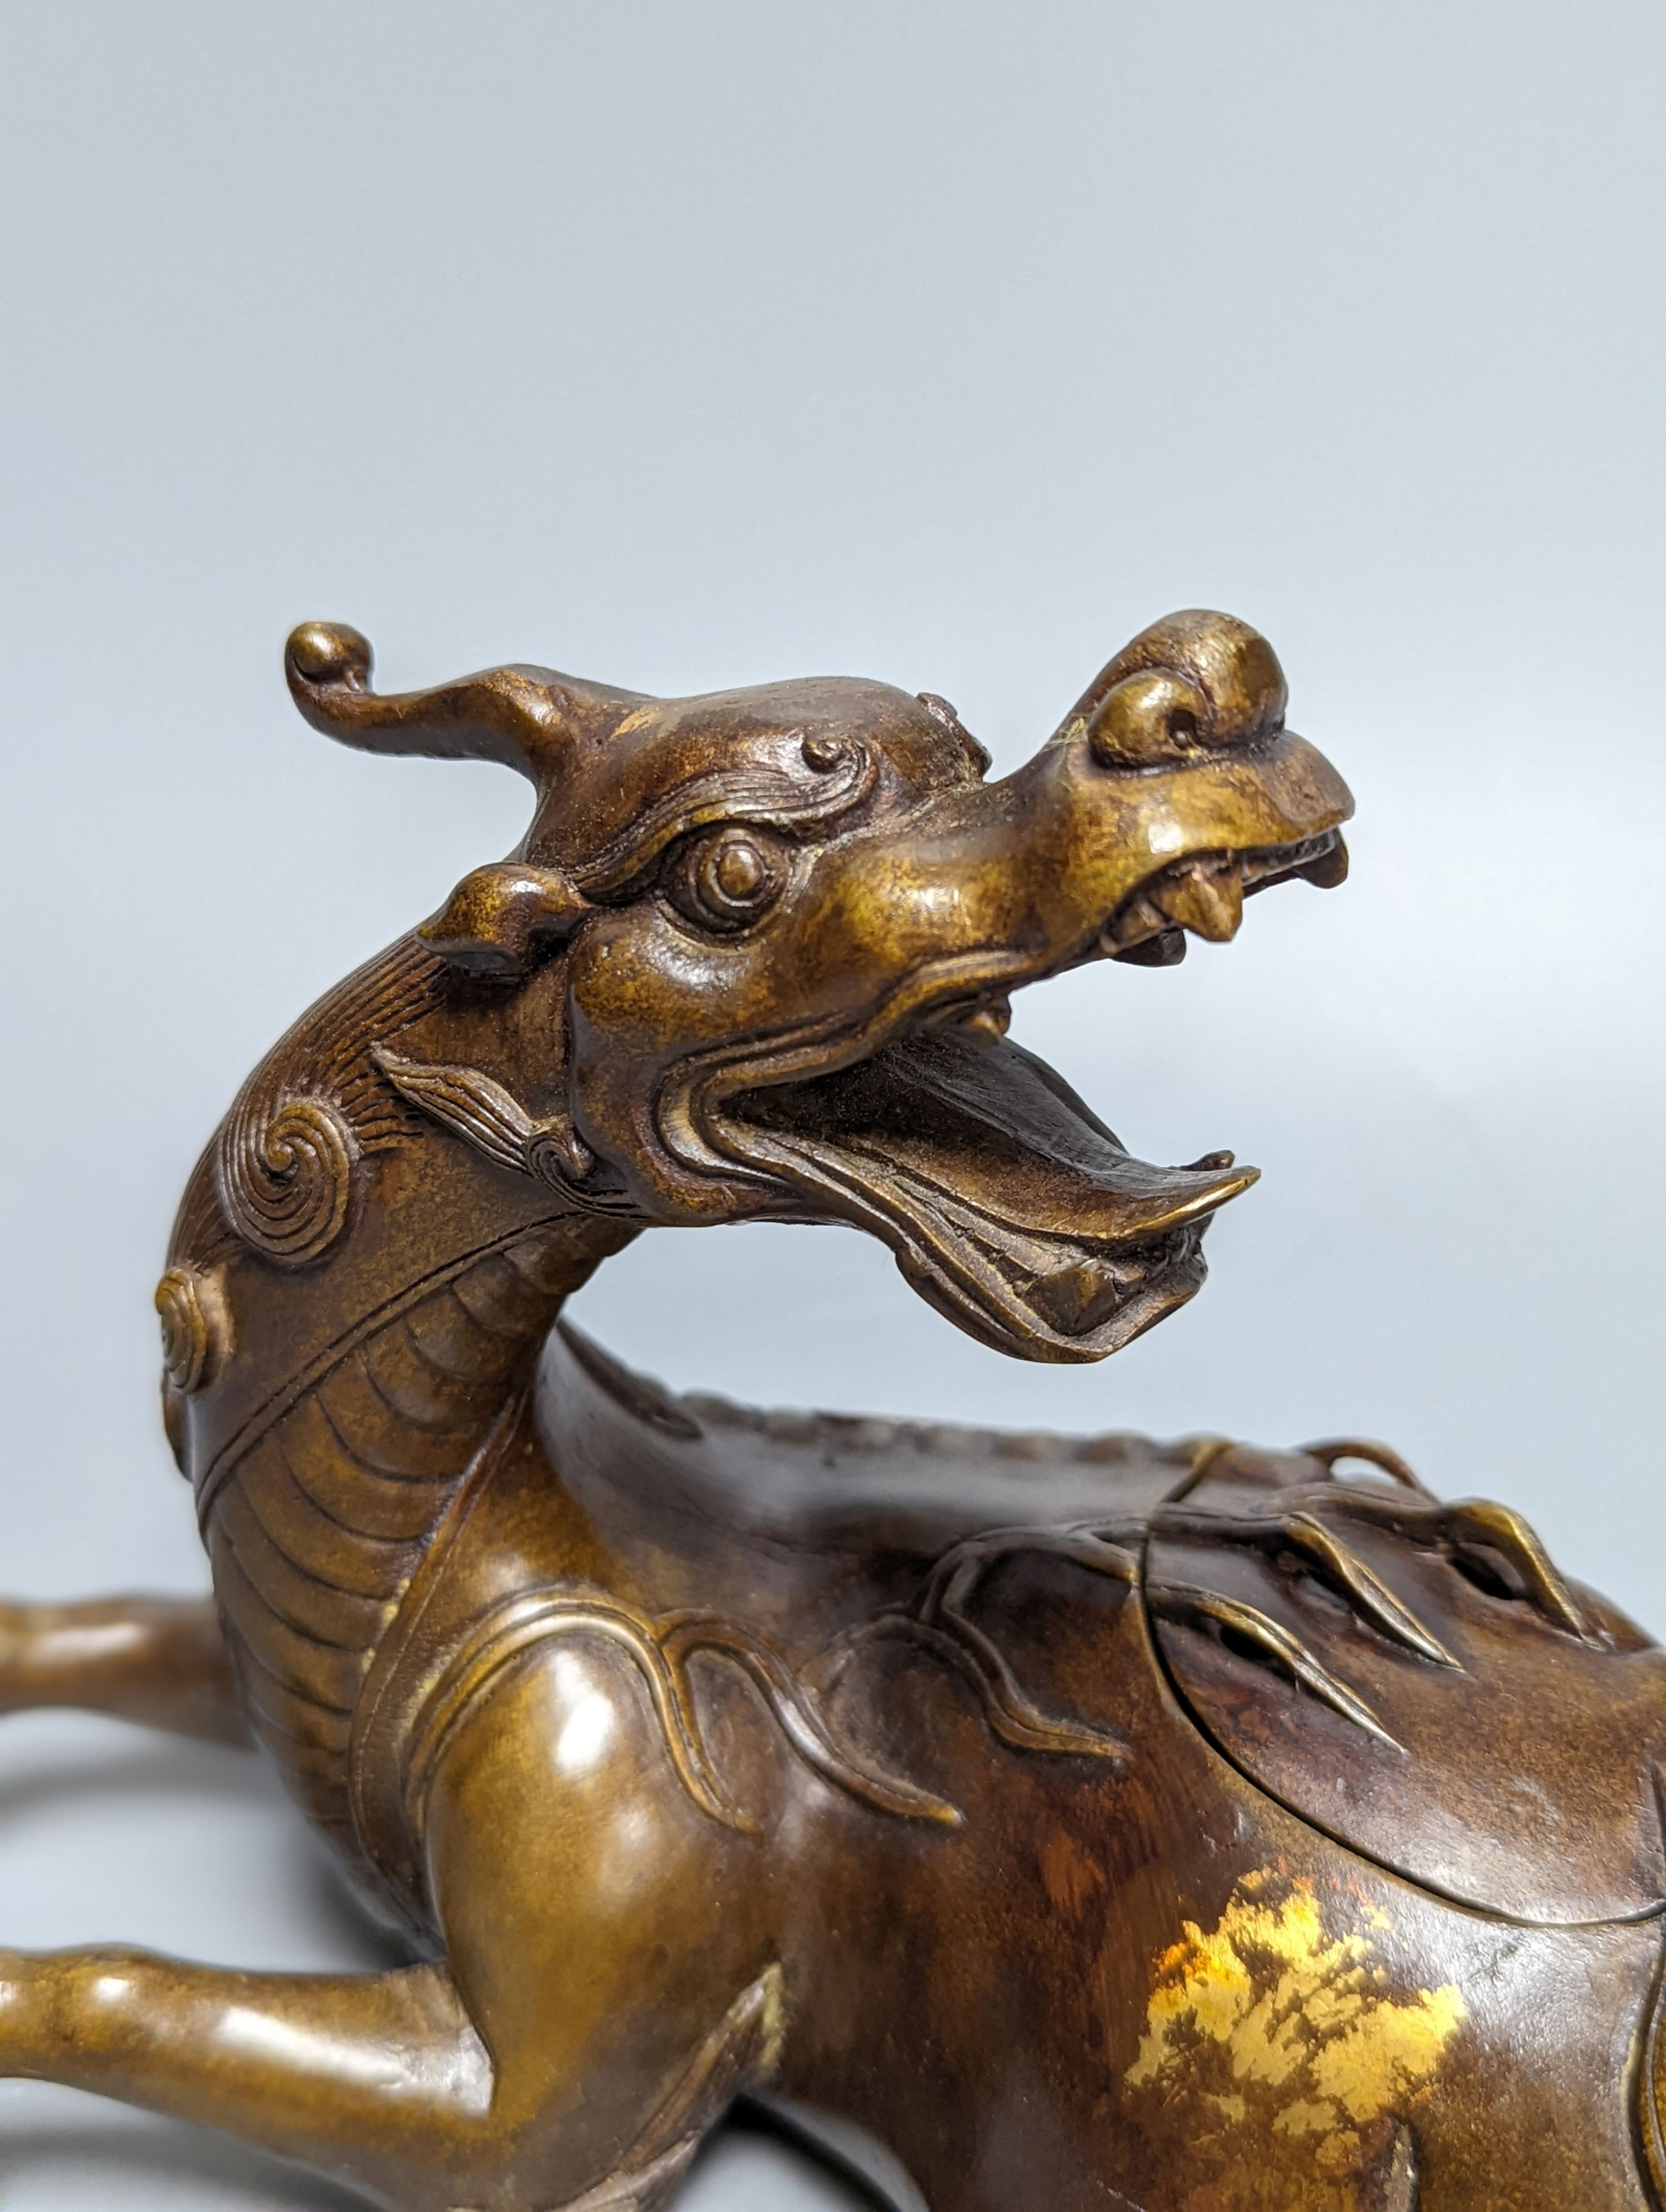 A Chinese parcel-gilt bronze incense burner and cover, modelled as a recumbent qilin, Qing dynasty, 19th century, 25 cms wide.